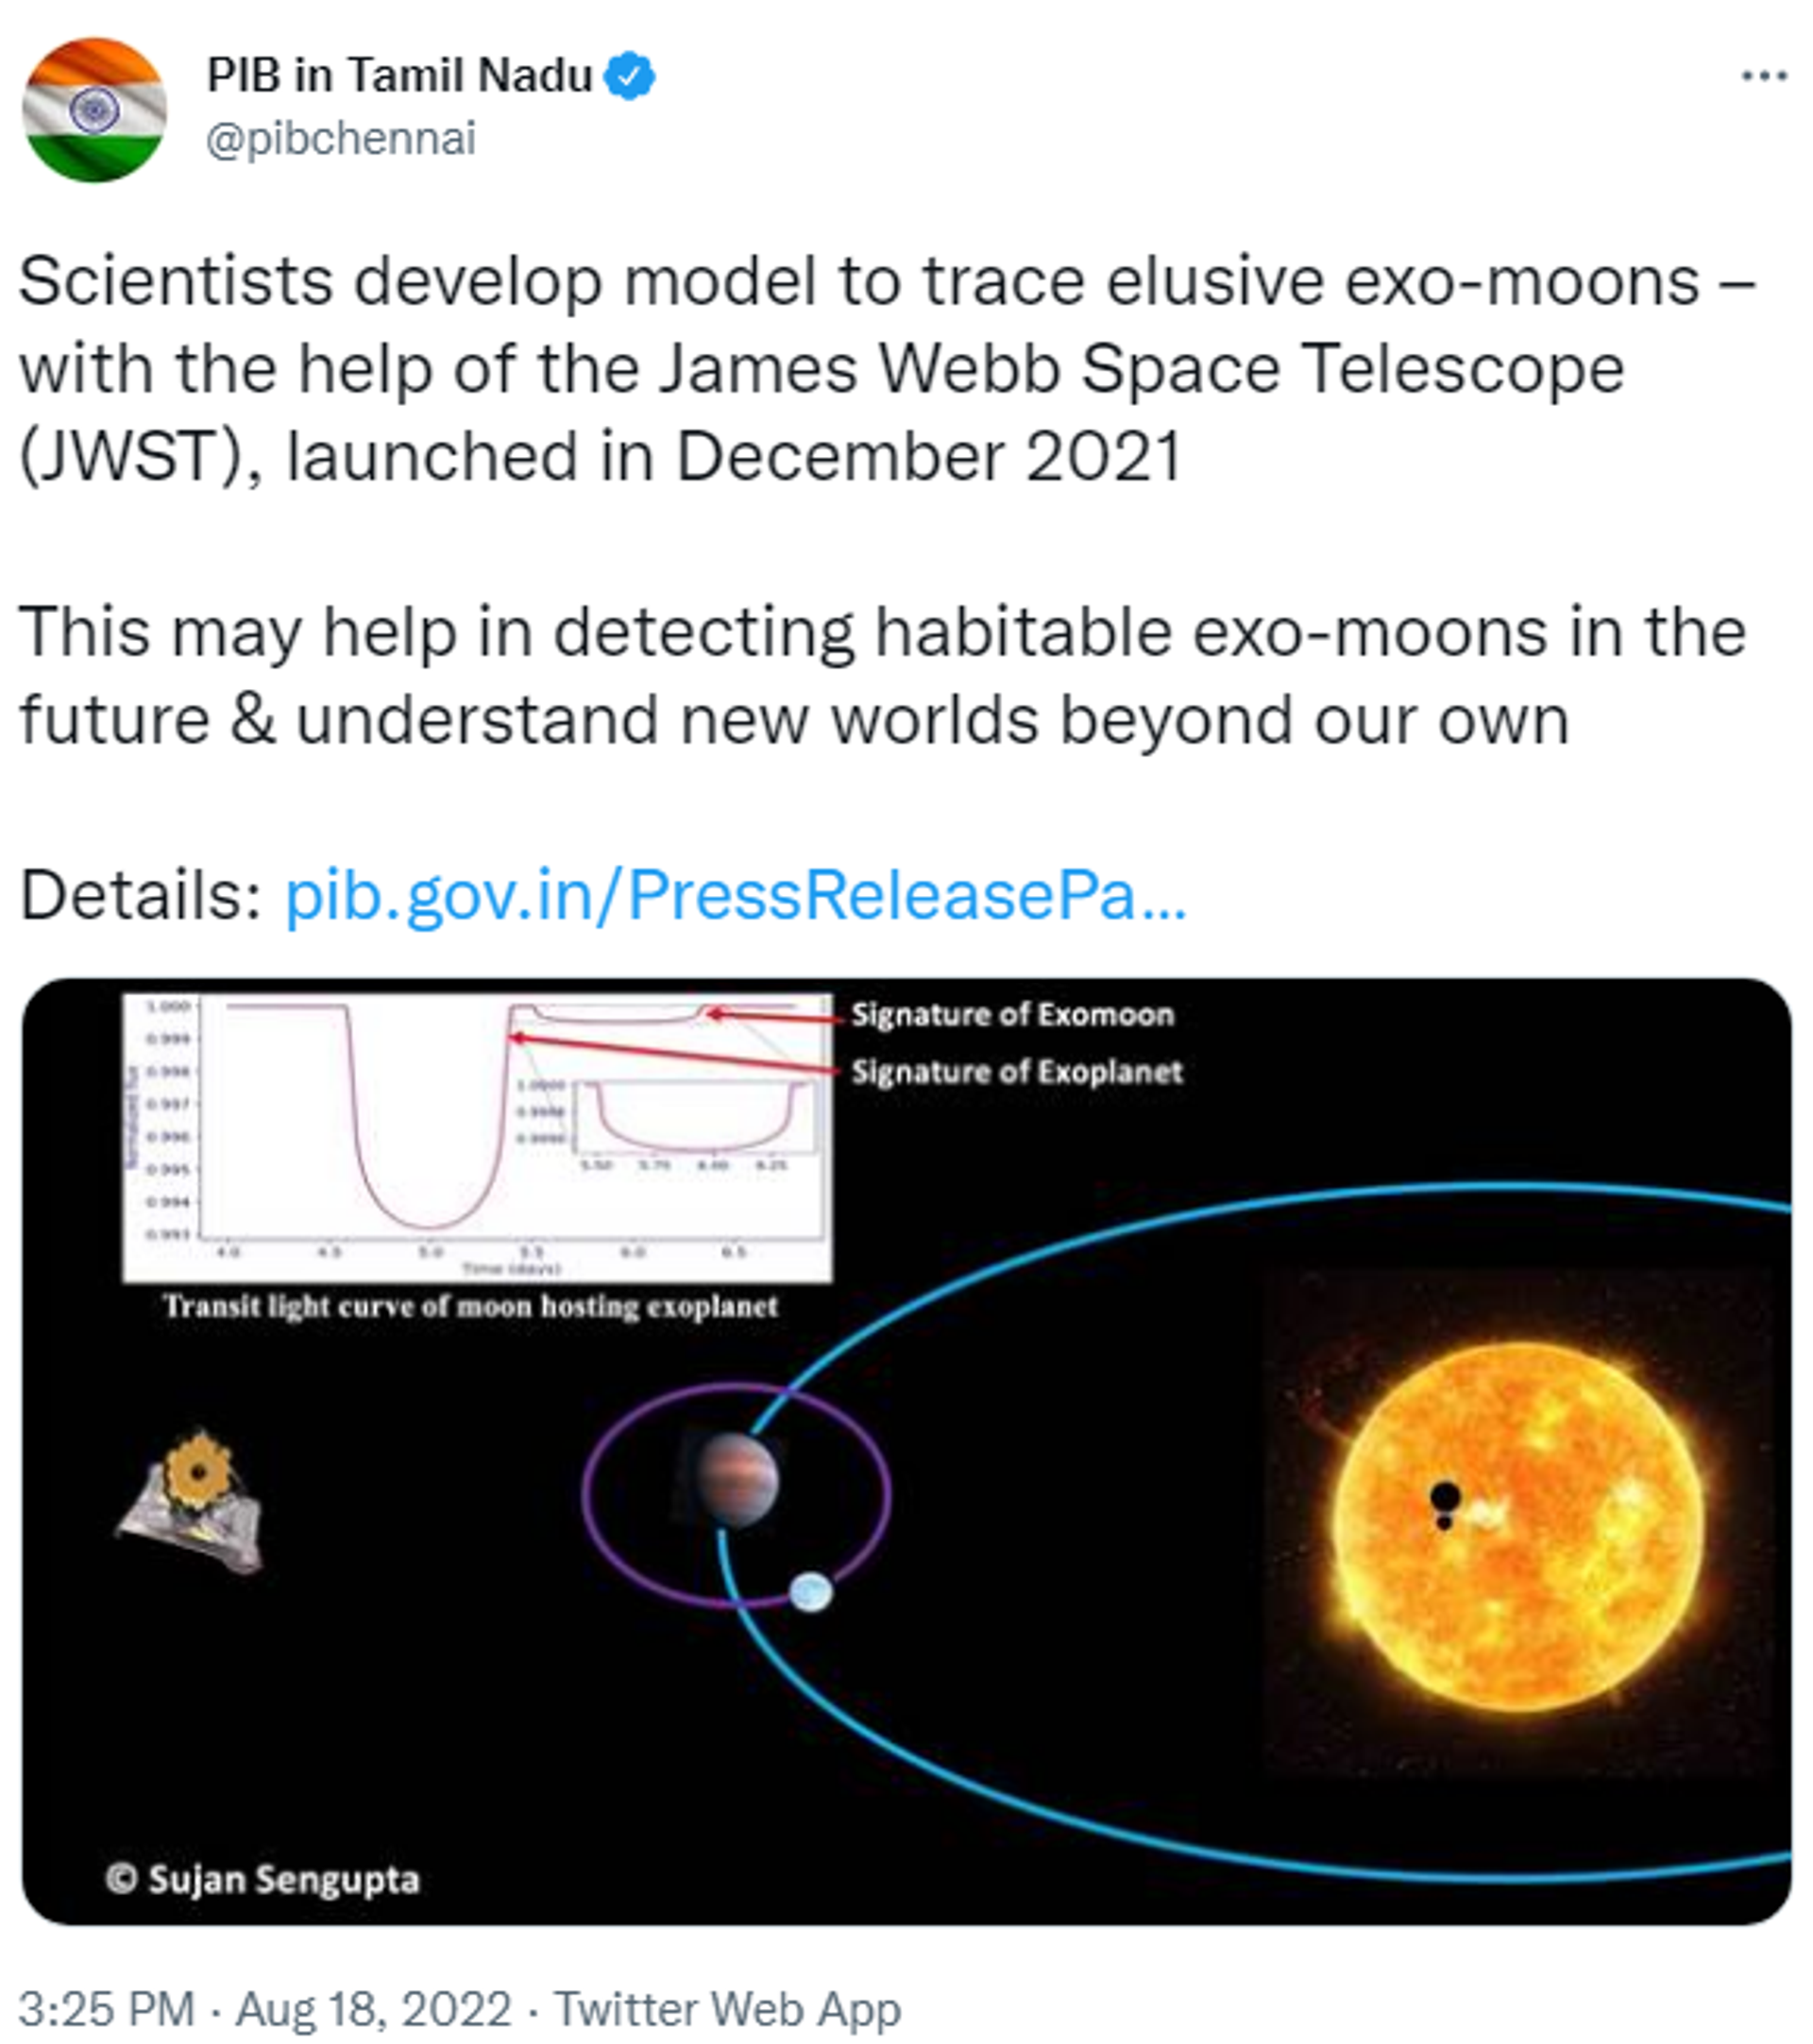 Scientists develop a model to trace elusive exo-moons with the help of the James Webb Space Telescope (JWST). - Sputnik International, 1920, 18.08.2022